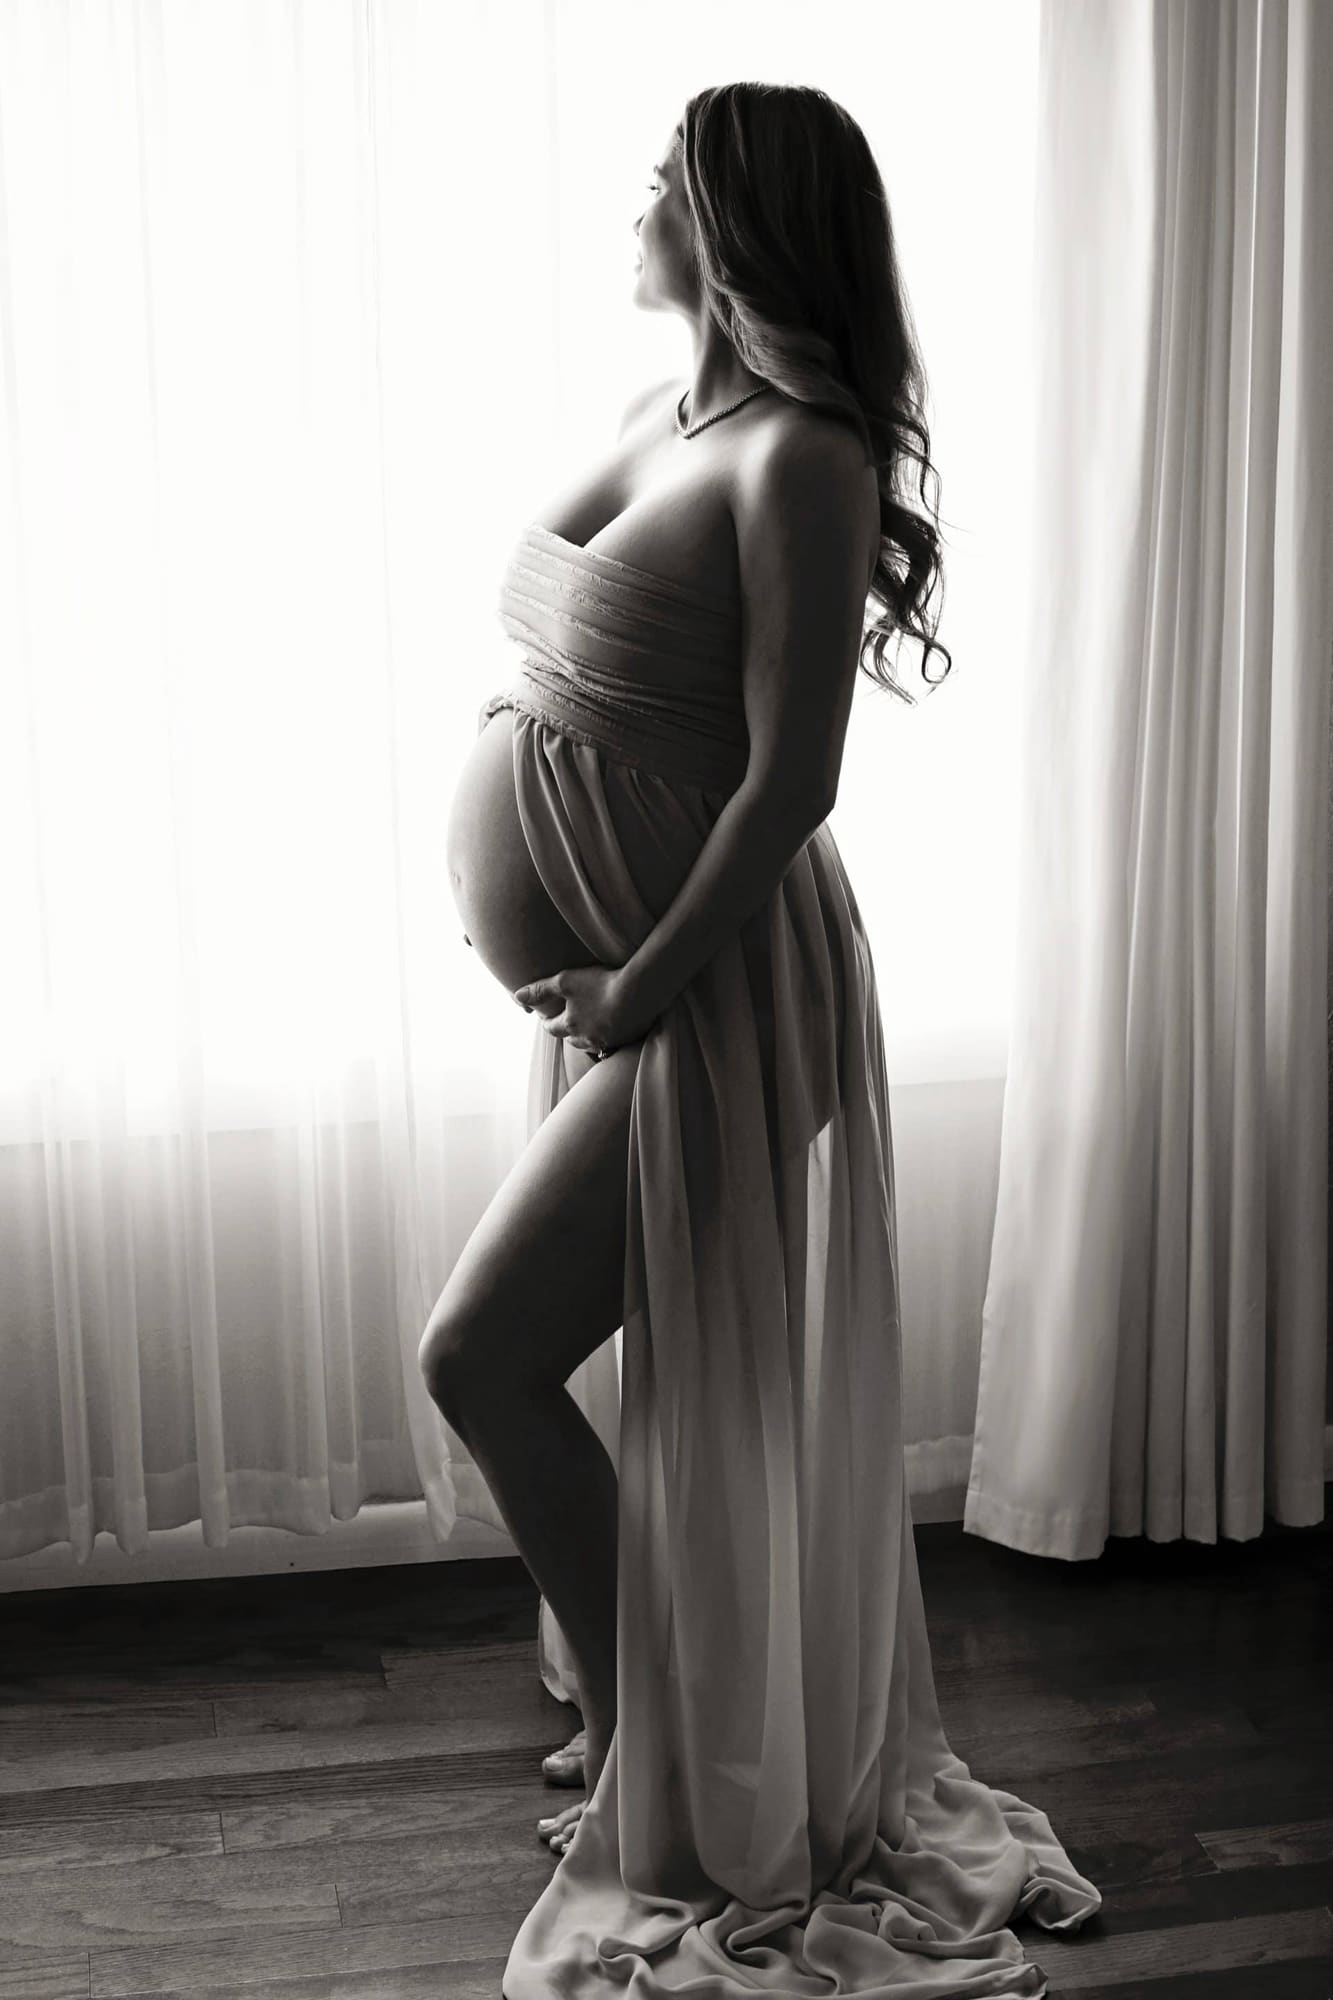 What Is a Boudoir Maternity Session? - Miette Photography